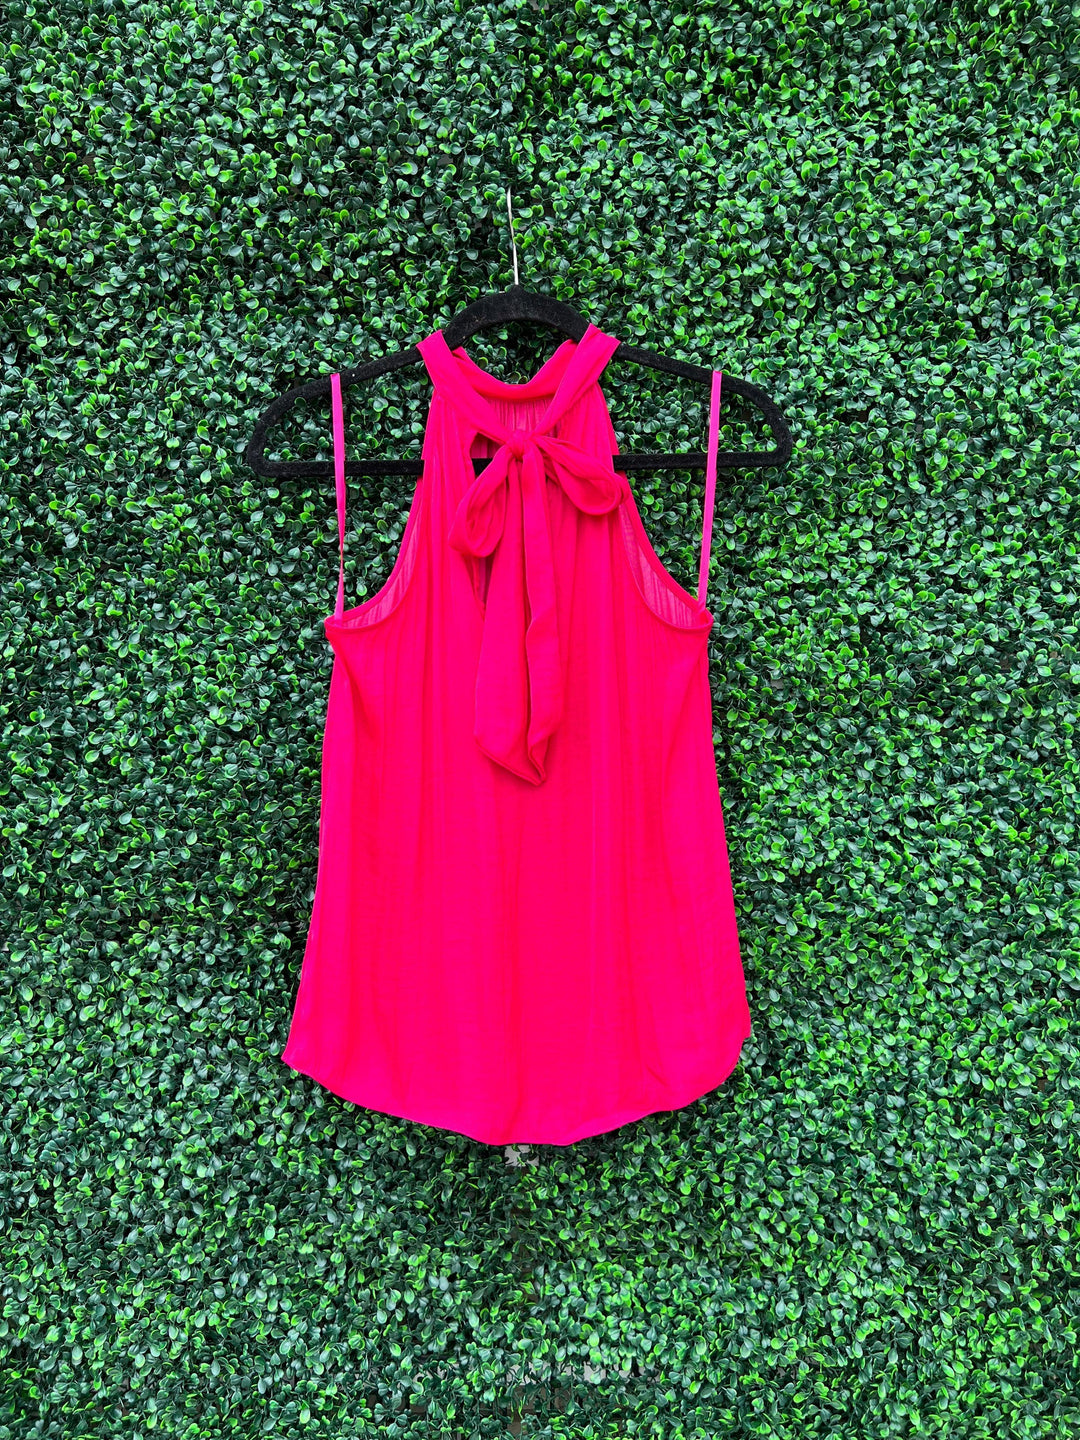 Tres Chic Dress Boutique on Houtson with silky tops can can be worn front and back in hot pink